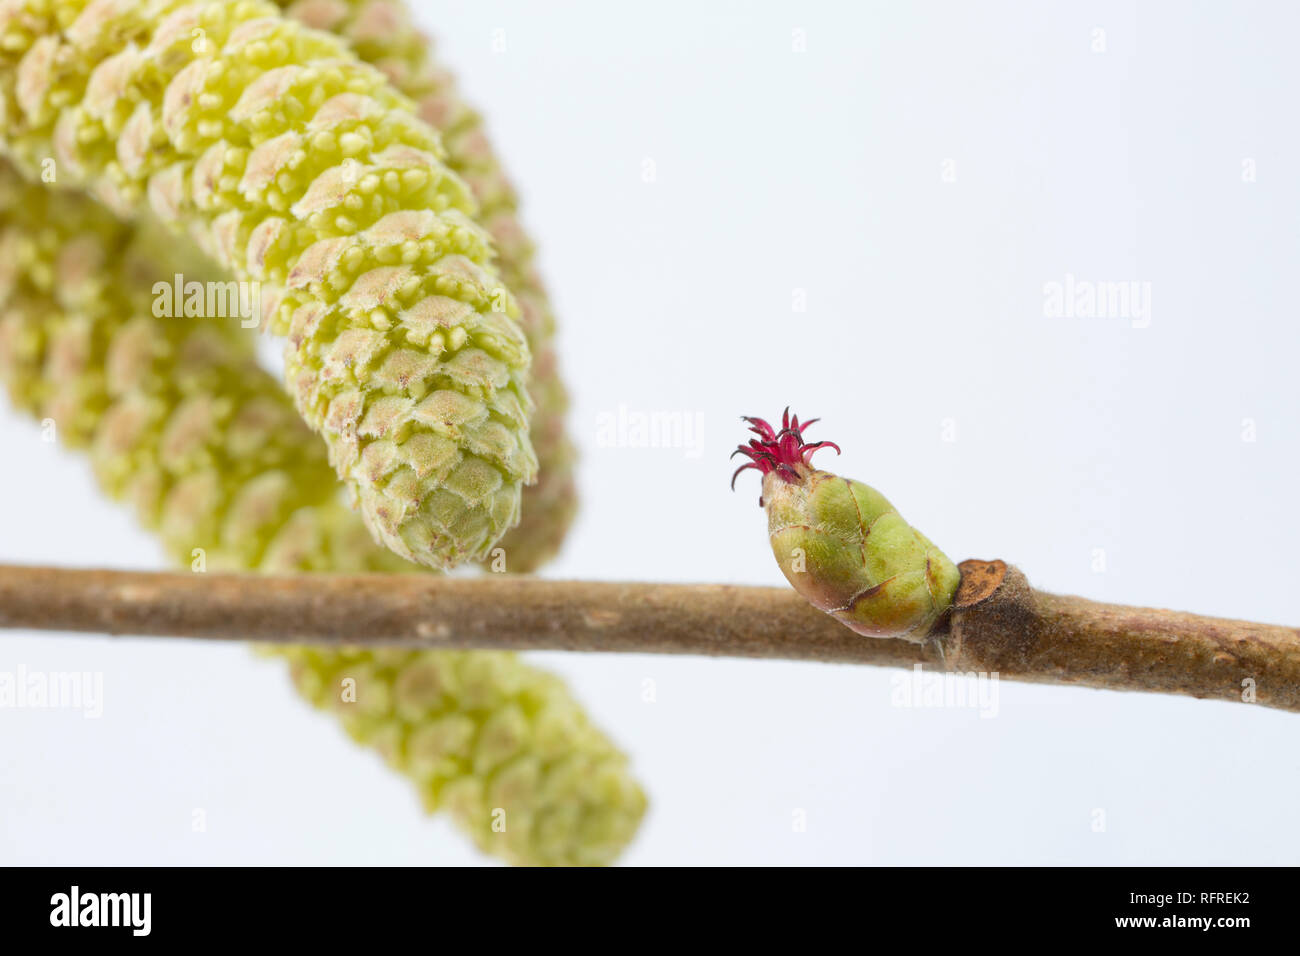 Male and female flowers of the Hazel tree, Corylus avellena. The yellow male catkins can be seen on the left of the picture and the female red flower  Stock Photo